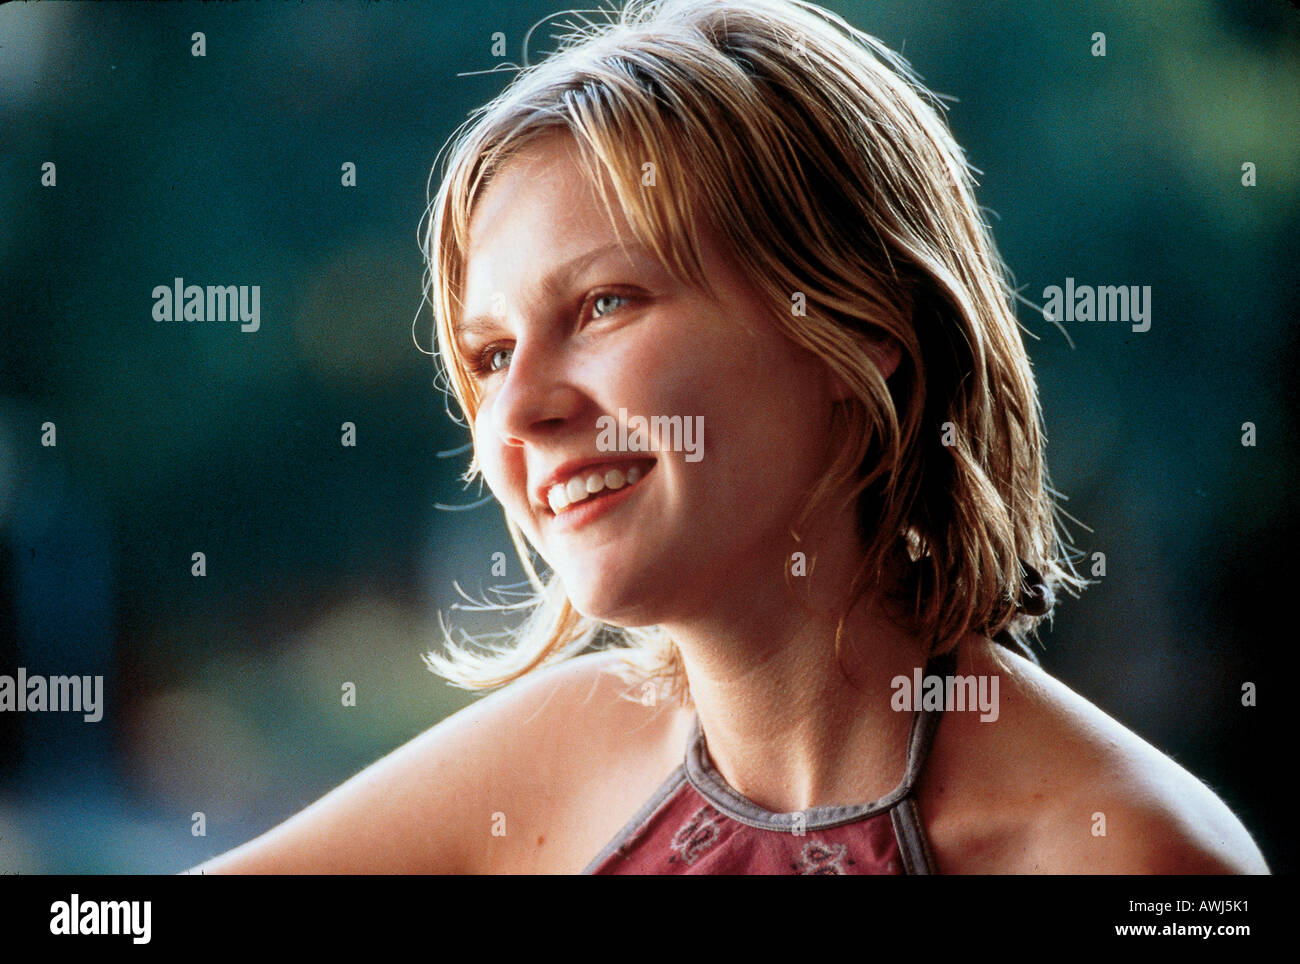 Original Film Title: GET OVER IT. English Title: GET OVER IT. Film  Director: TOMMY O'HAVER. Year: 2001. Stars: KIRSTEN DUNST. Copyright:  Editorial inside use only. This is a publicly distributed handout. Access